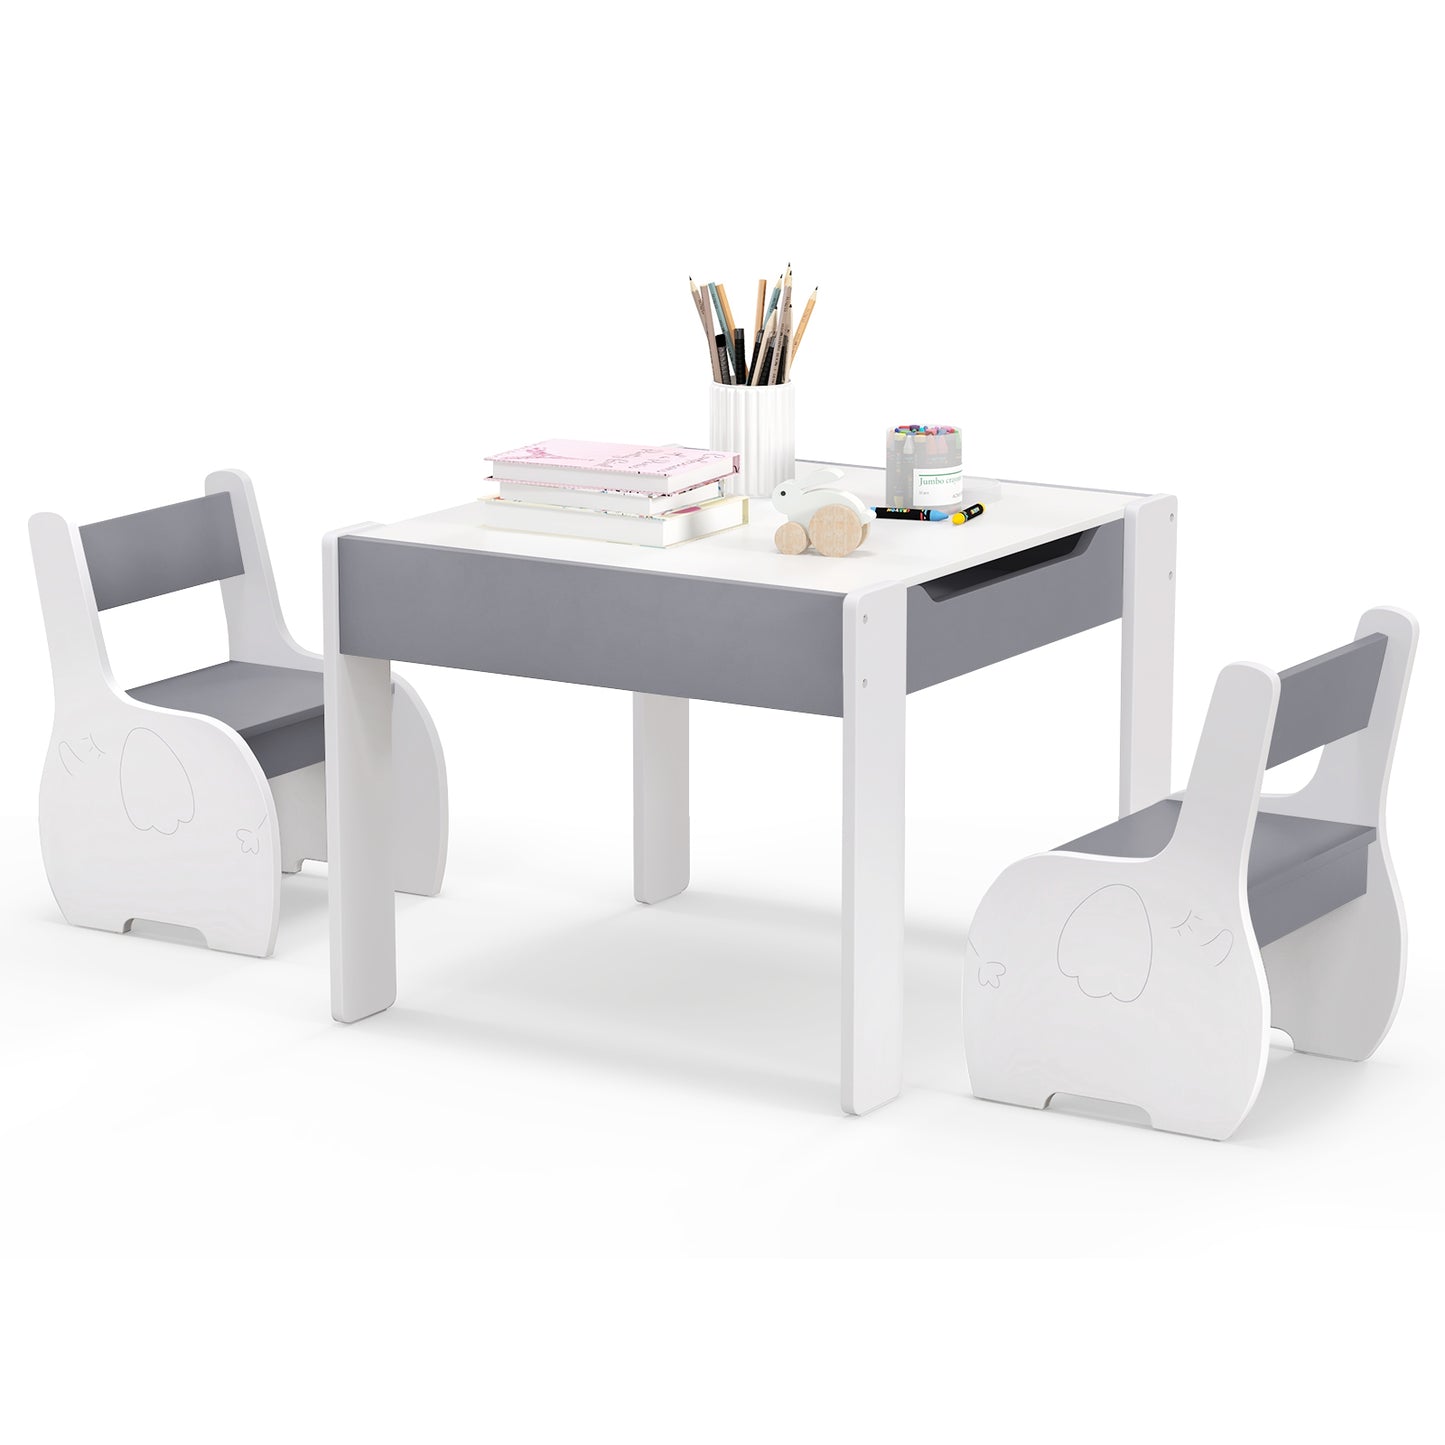 4-in-1 Wooden Activity Kids Table and Chairs with Storage and Detachable Blackboard-Gray